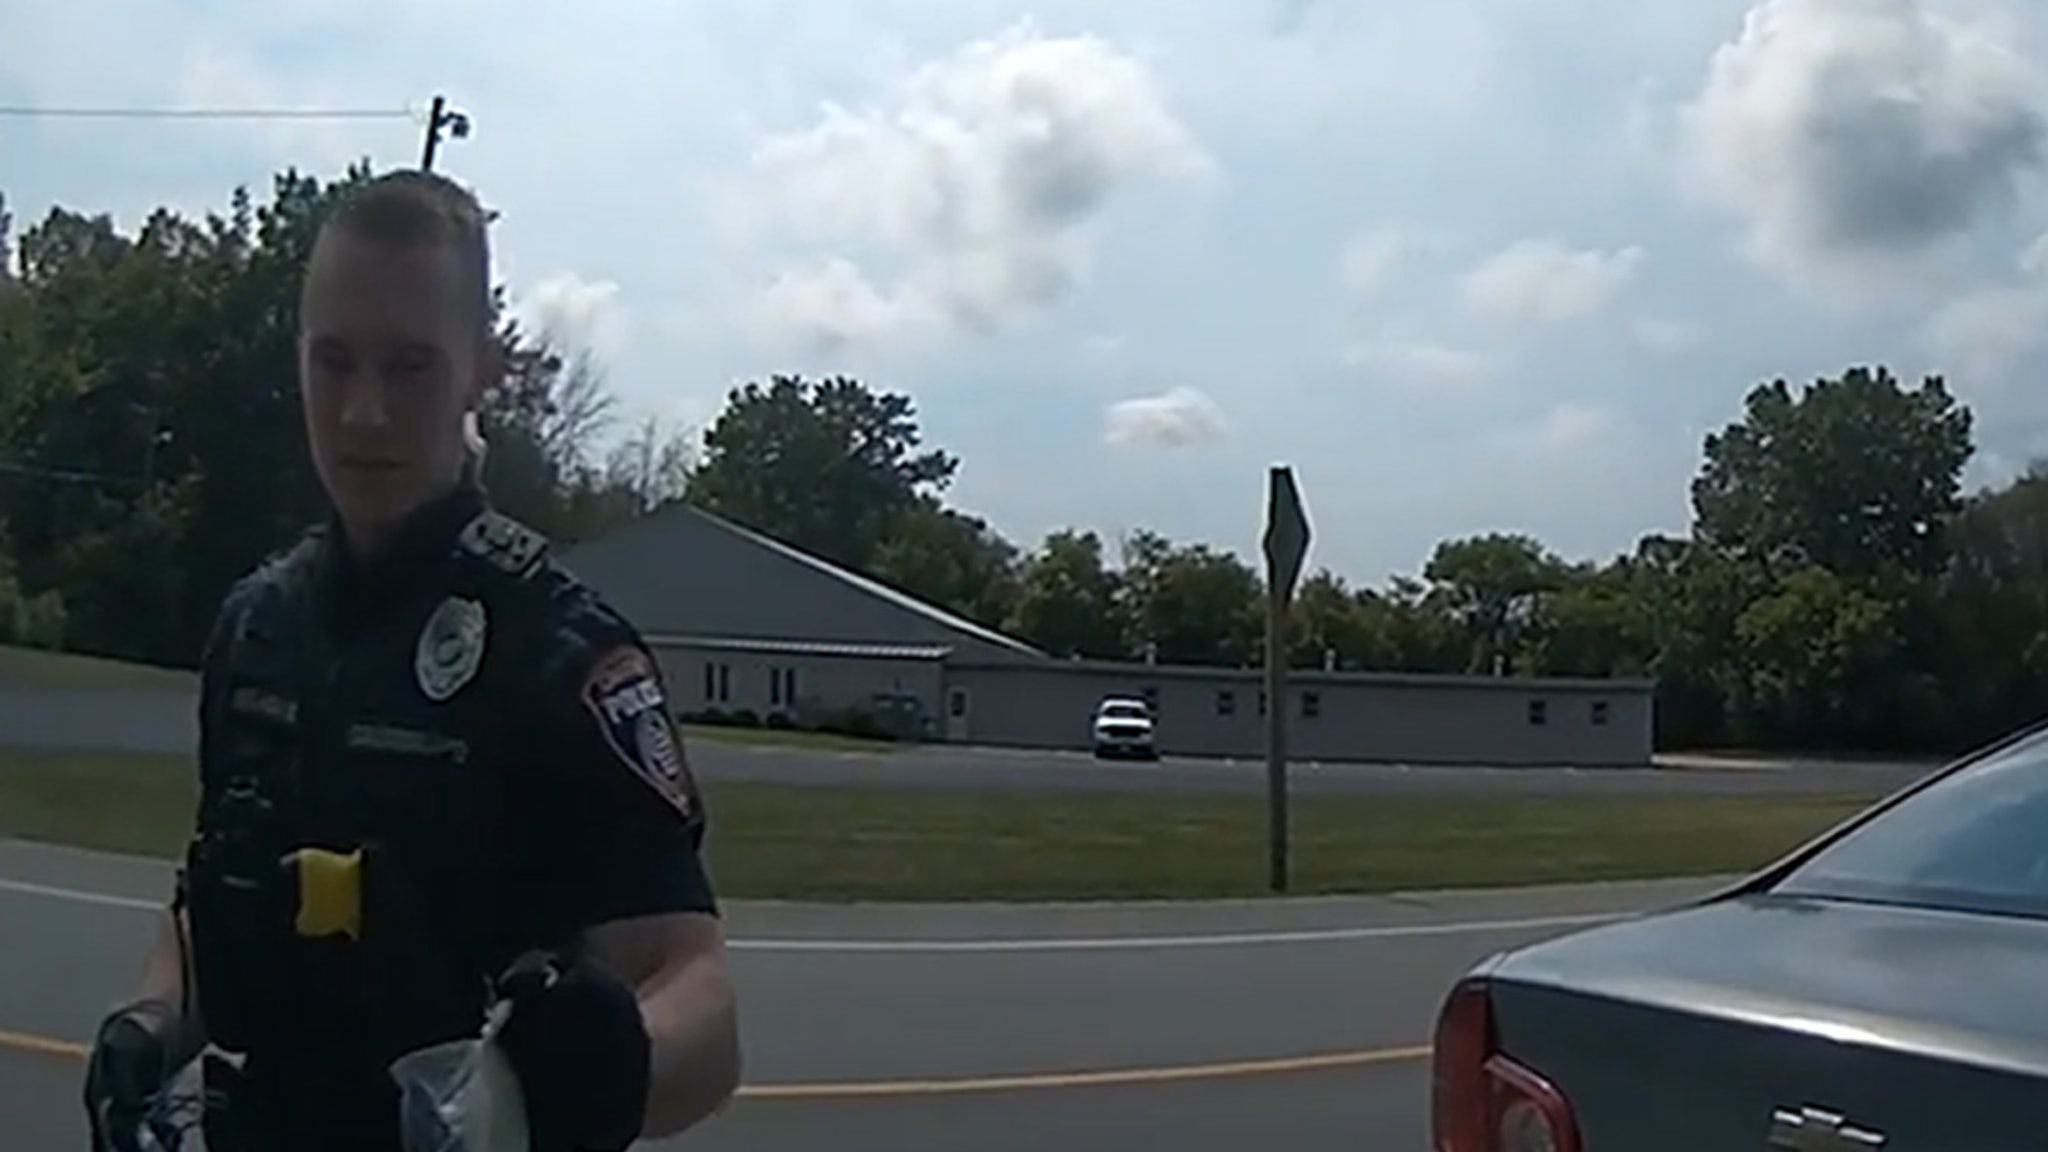 Wisconsin Police Deny Planting Drugs, Release Body Cam Footage